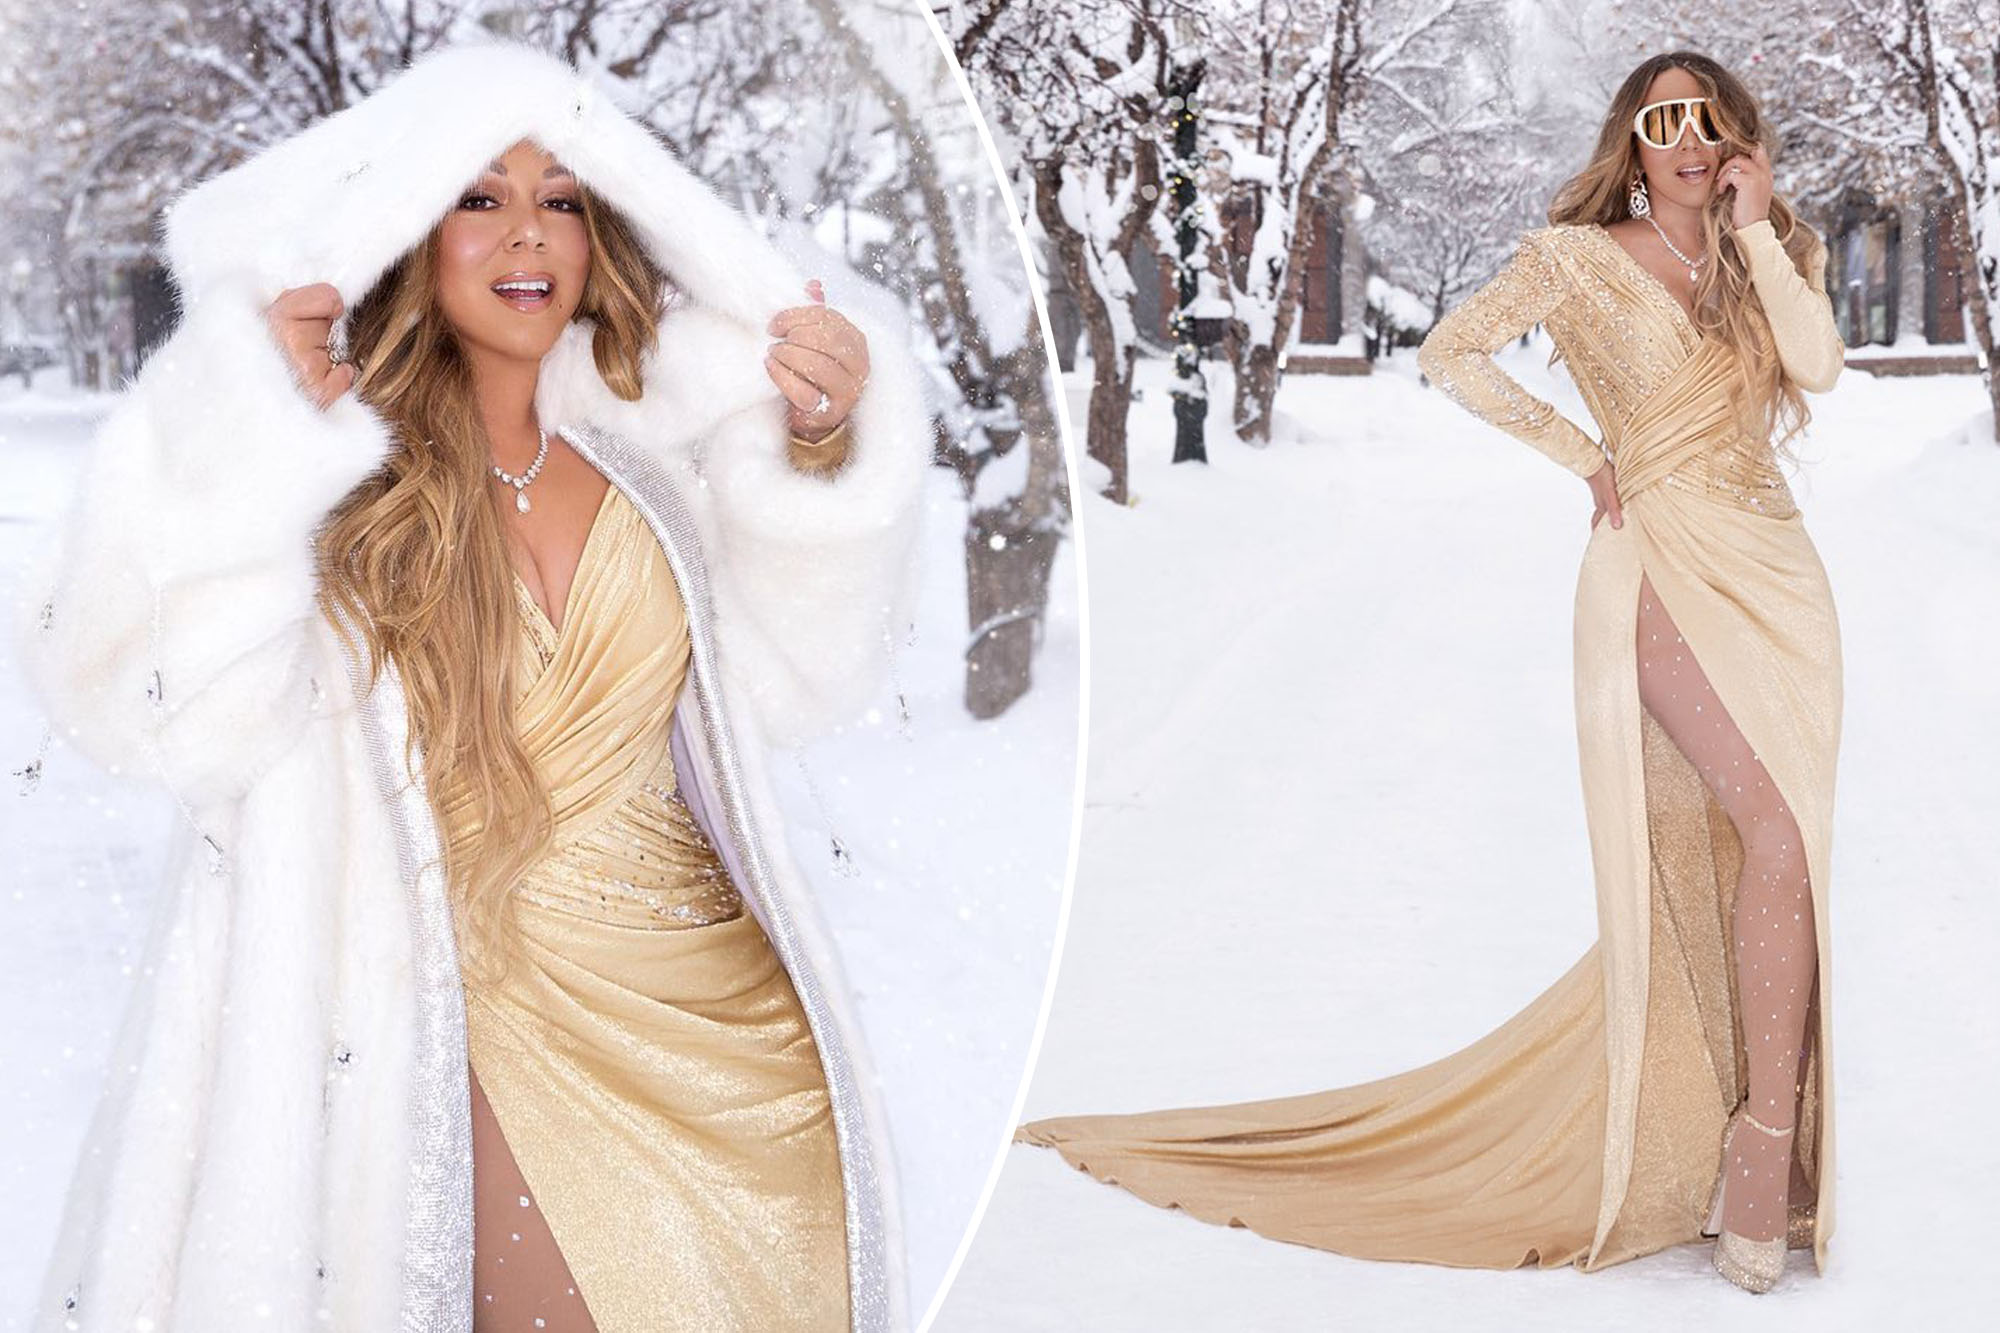 Mariah Carey wears plunging dress in the snow for New Year's